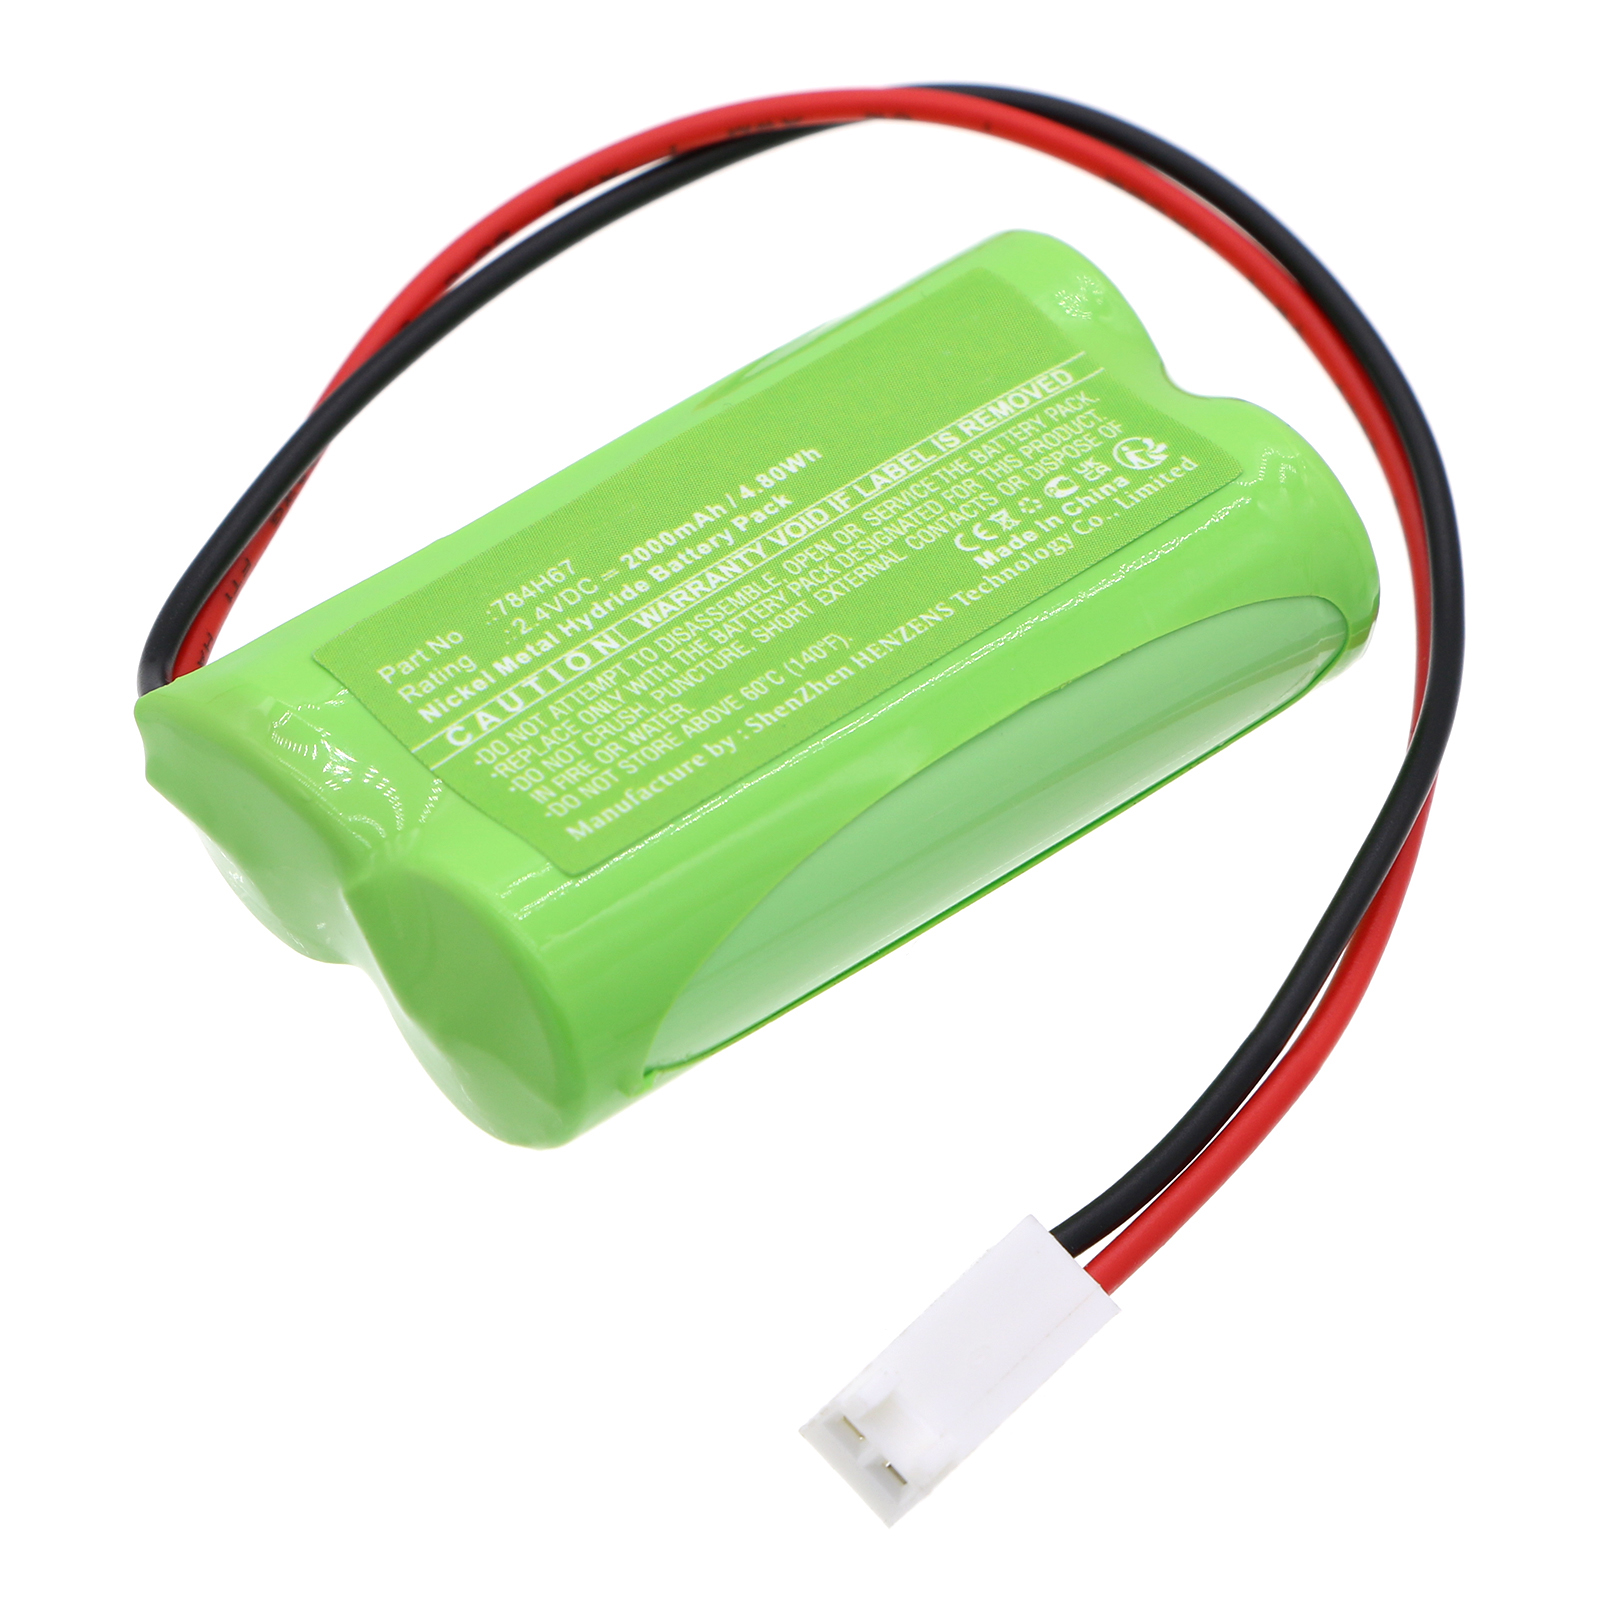 Synergy Digital Security and Safety Battery, Compatible with DUAL-LITE 784H67 Security and Safety Battery (Ni-MH, 2.4V, 2000mAh)